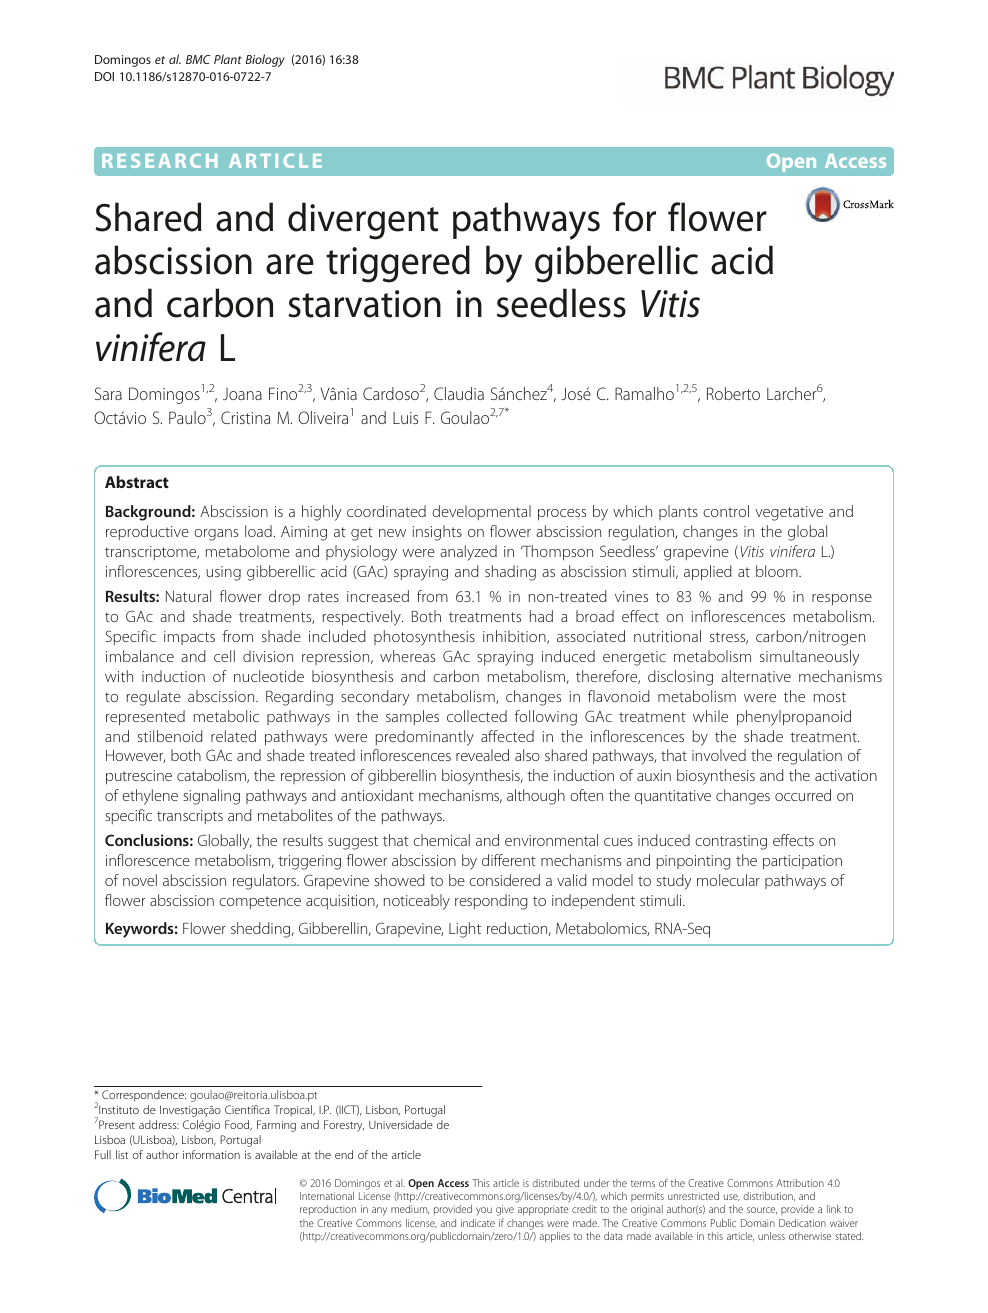 Shared And Divergent Pathways For Flower Abscission Are Triggered By Gibberellic Acid And Carbon Starvation In Seedless Vitis Vinifera L Topic Of Research Paper In Biological Sciences Download Scholarly Article Pdf